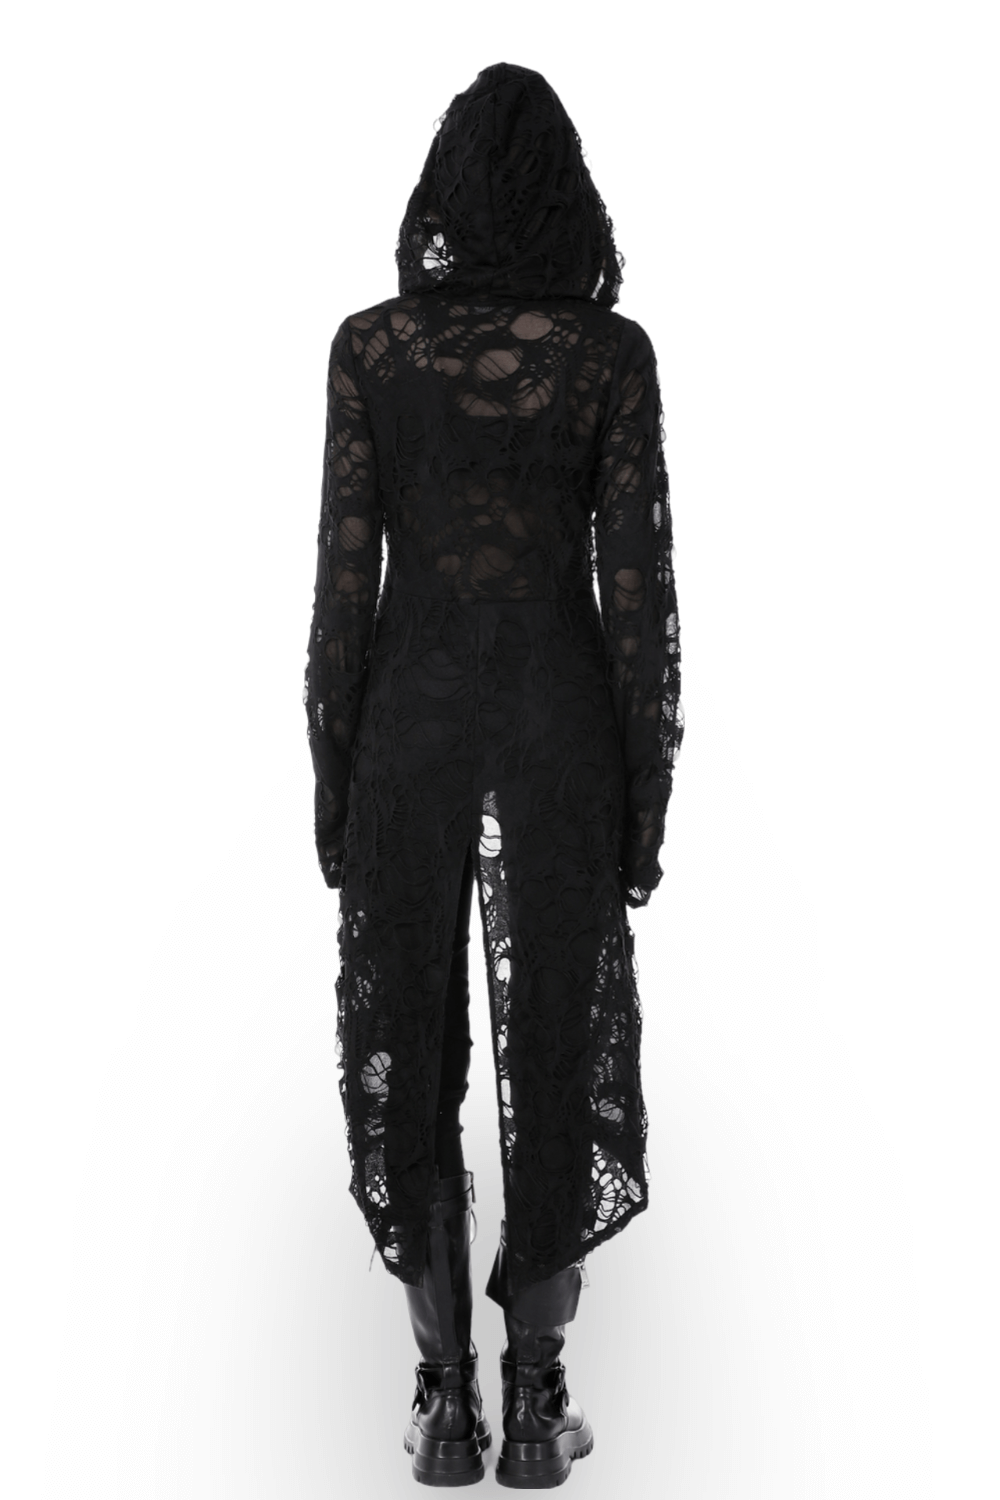 Black Zipper Distressed Gothic Lace Coat with Hood